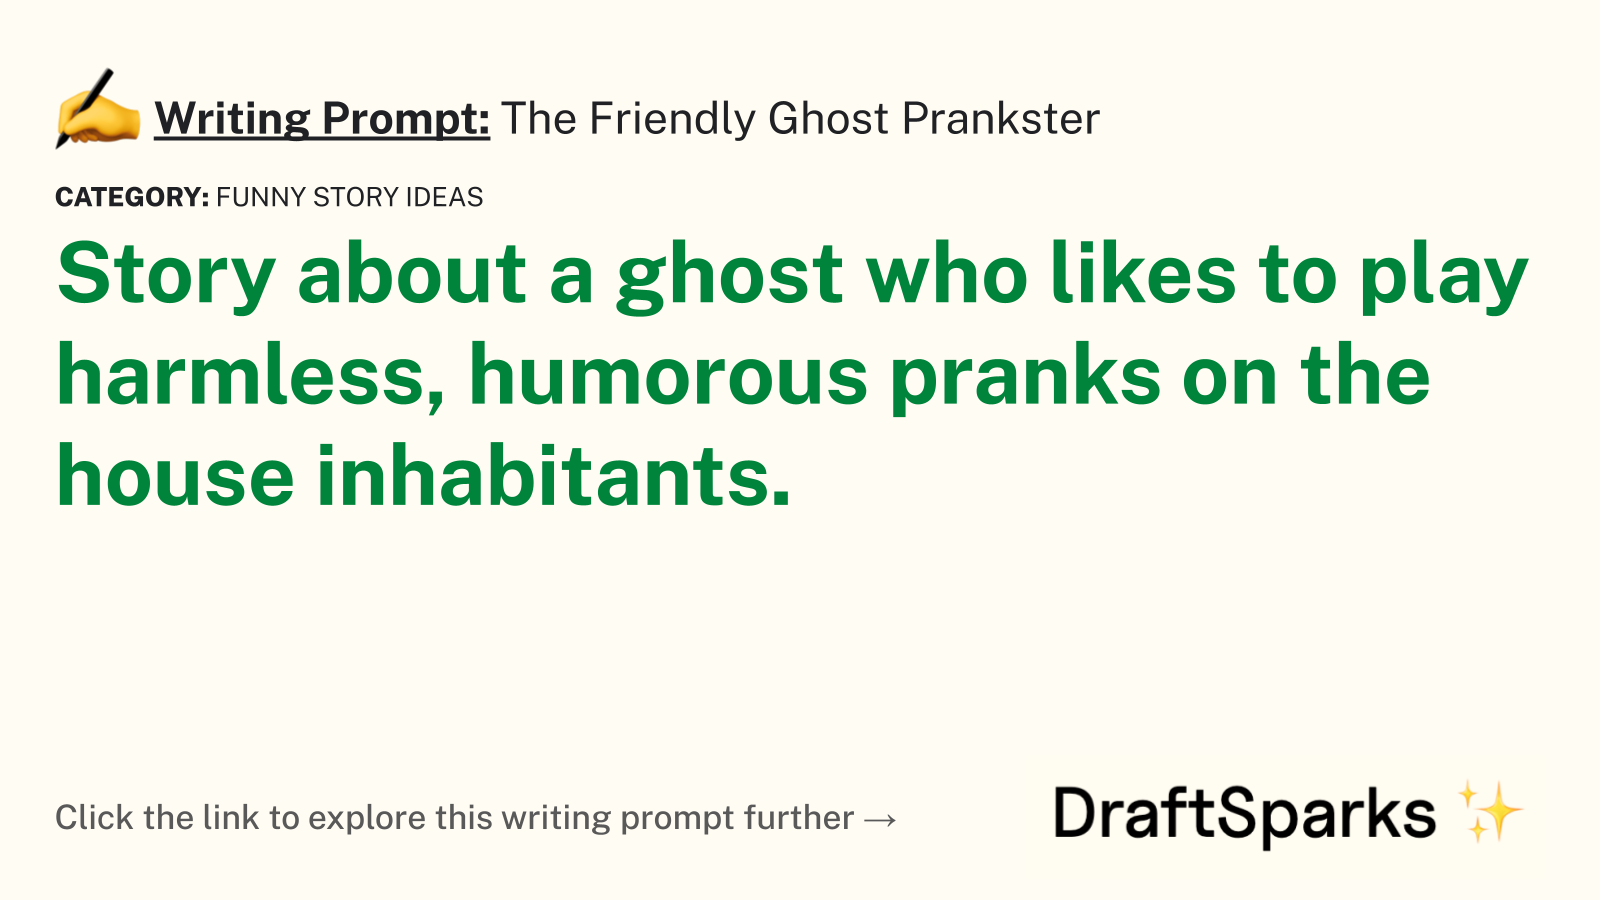 The Friendly Ghost Prankster